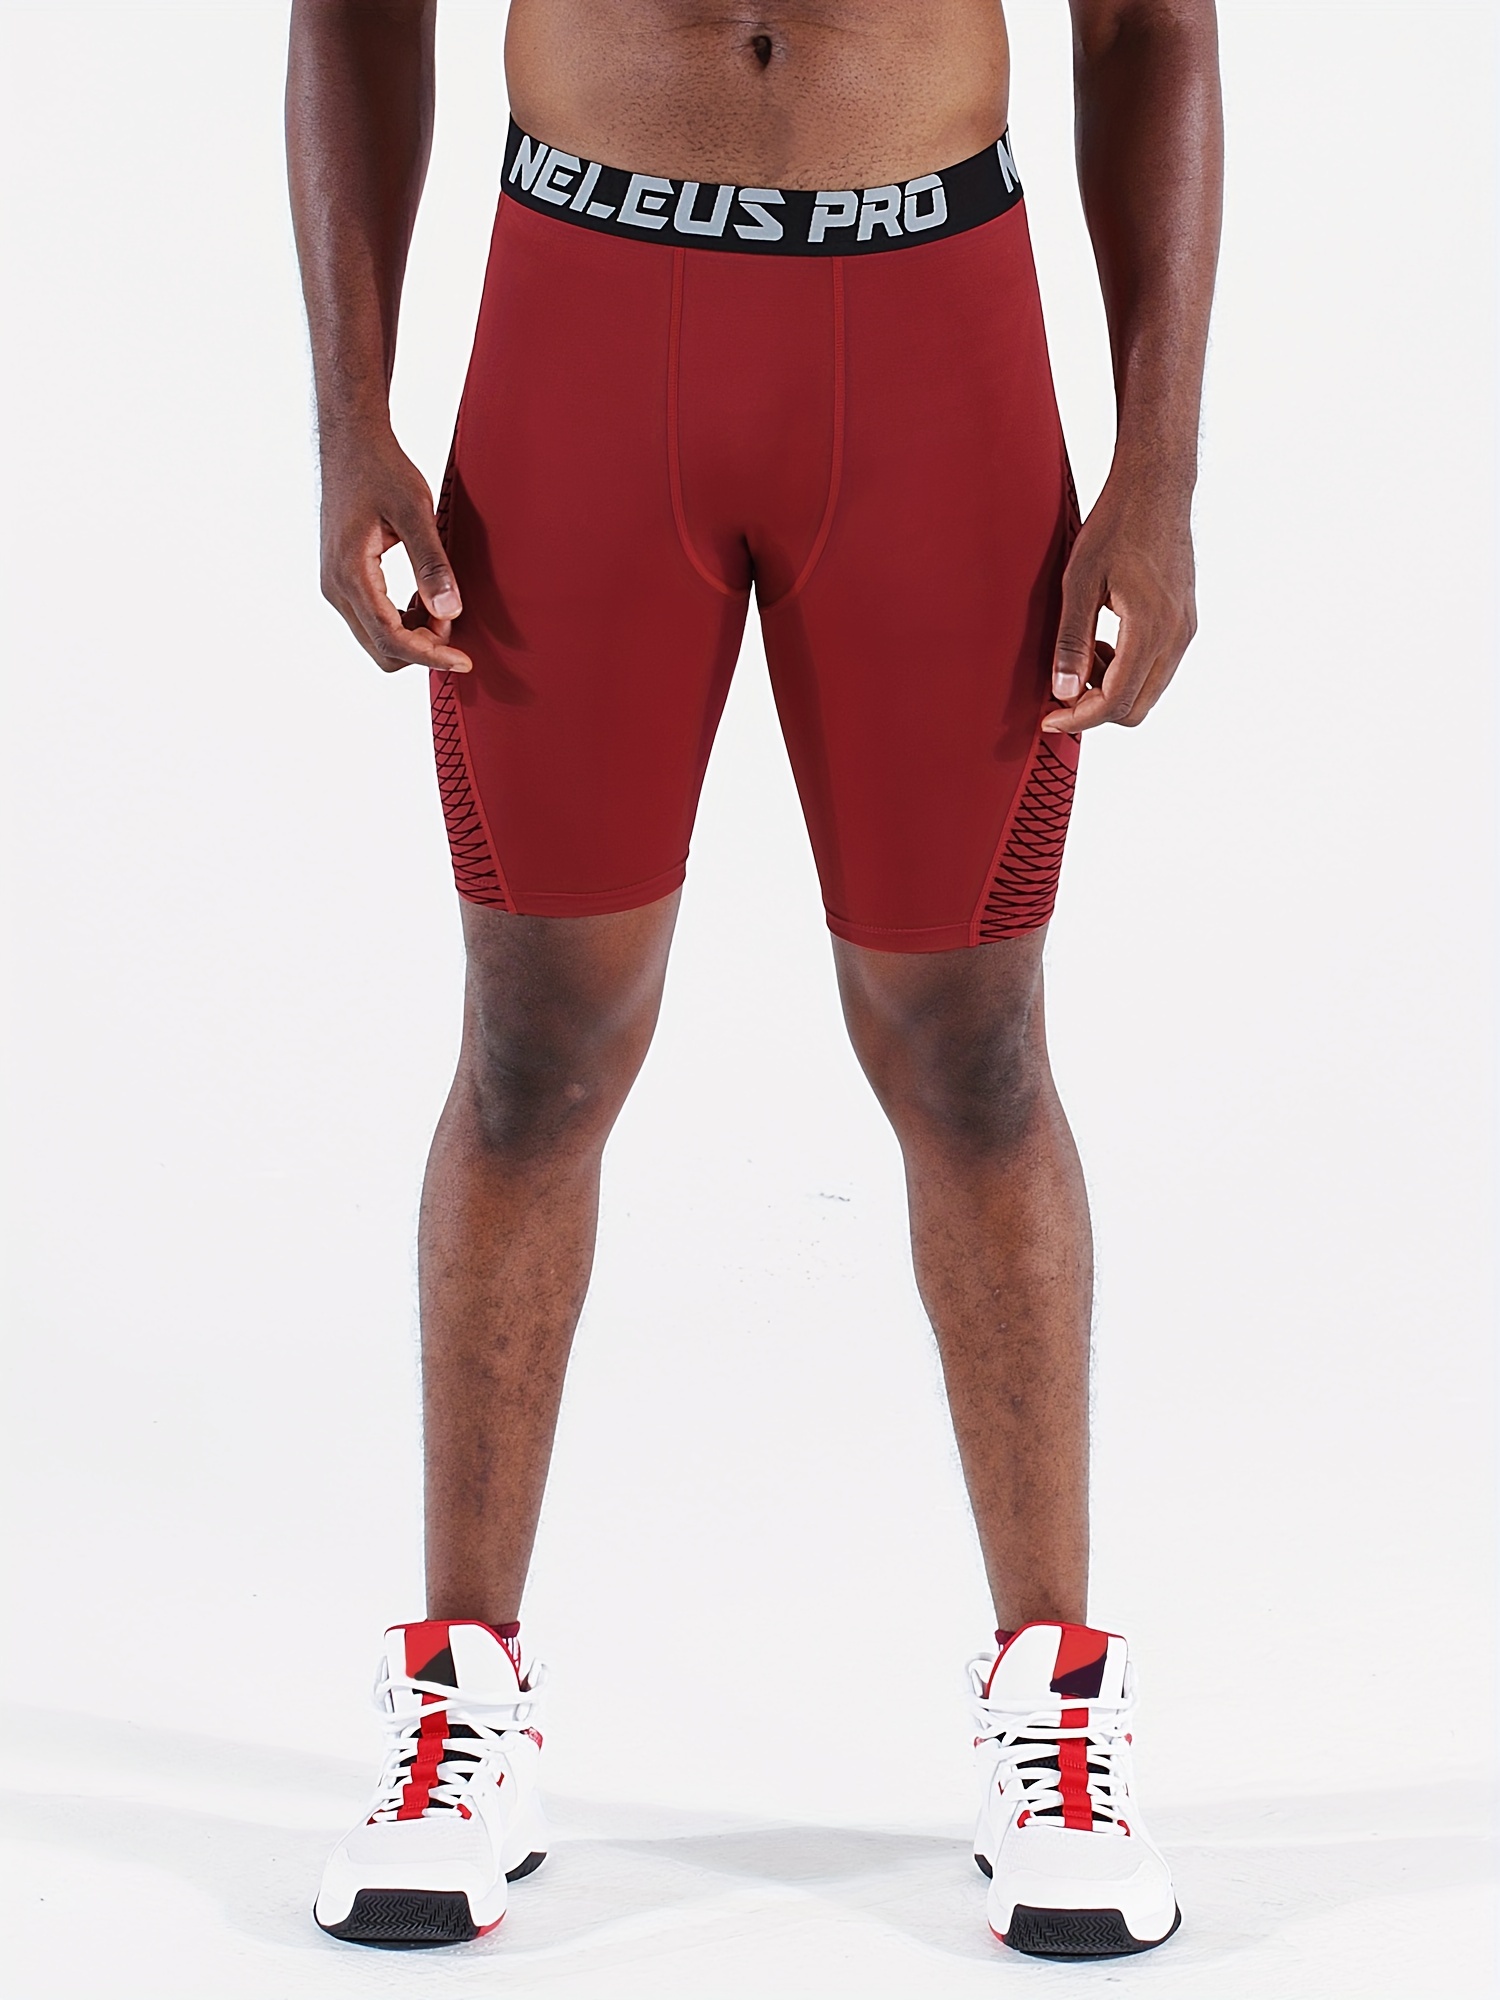 NIKE men's basketball compression shorts quick-drying sportwear